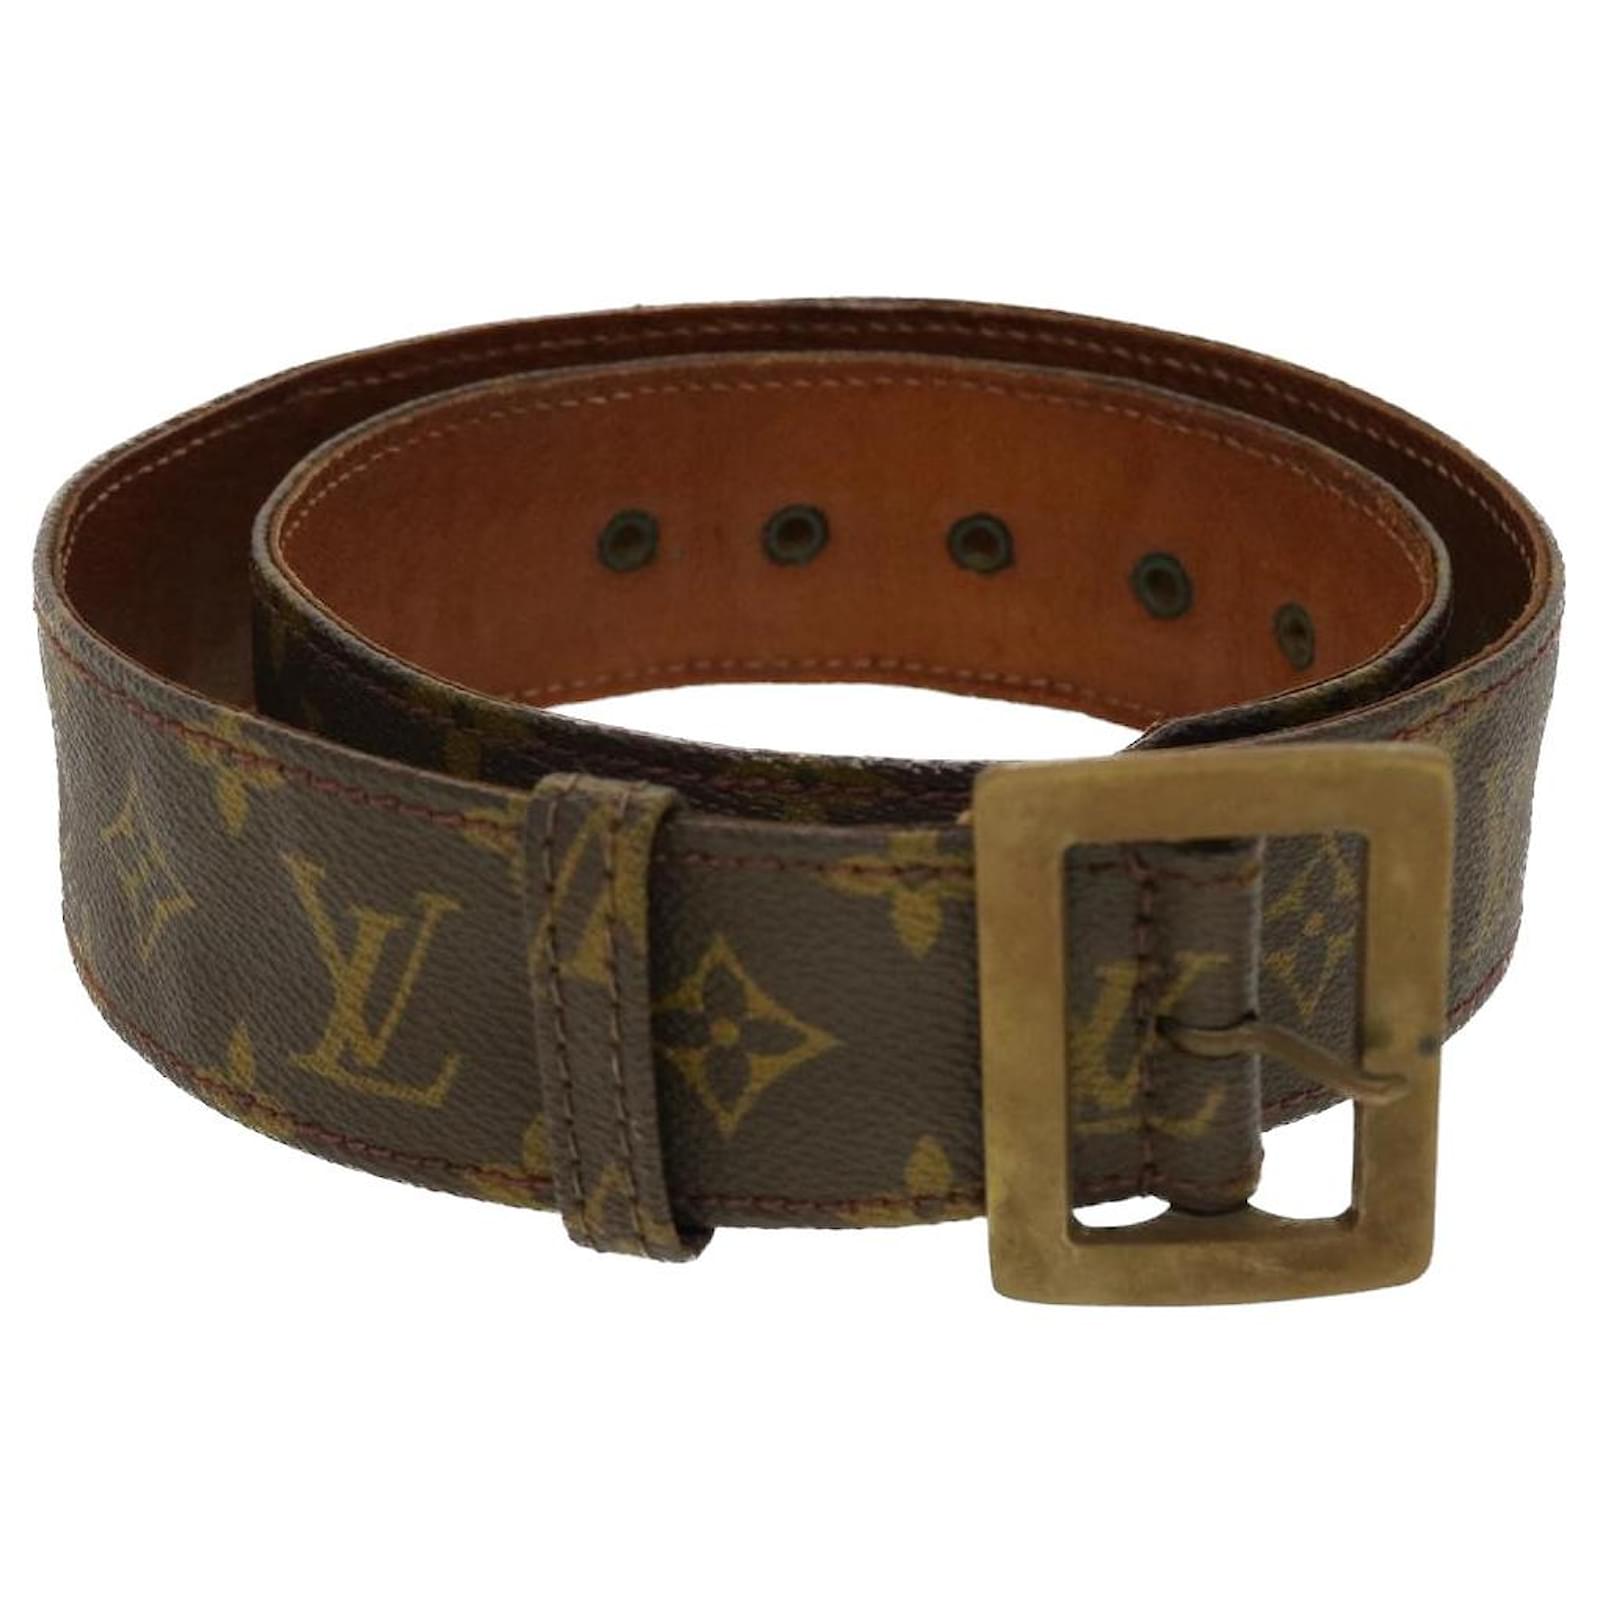 Louis Vuitton Initiales 40mm mens black belt. Iconic and timeless